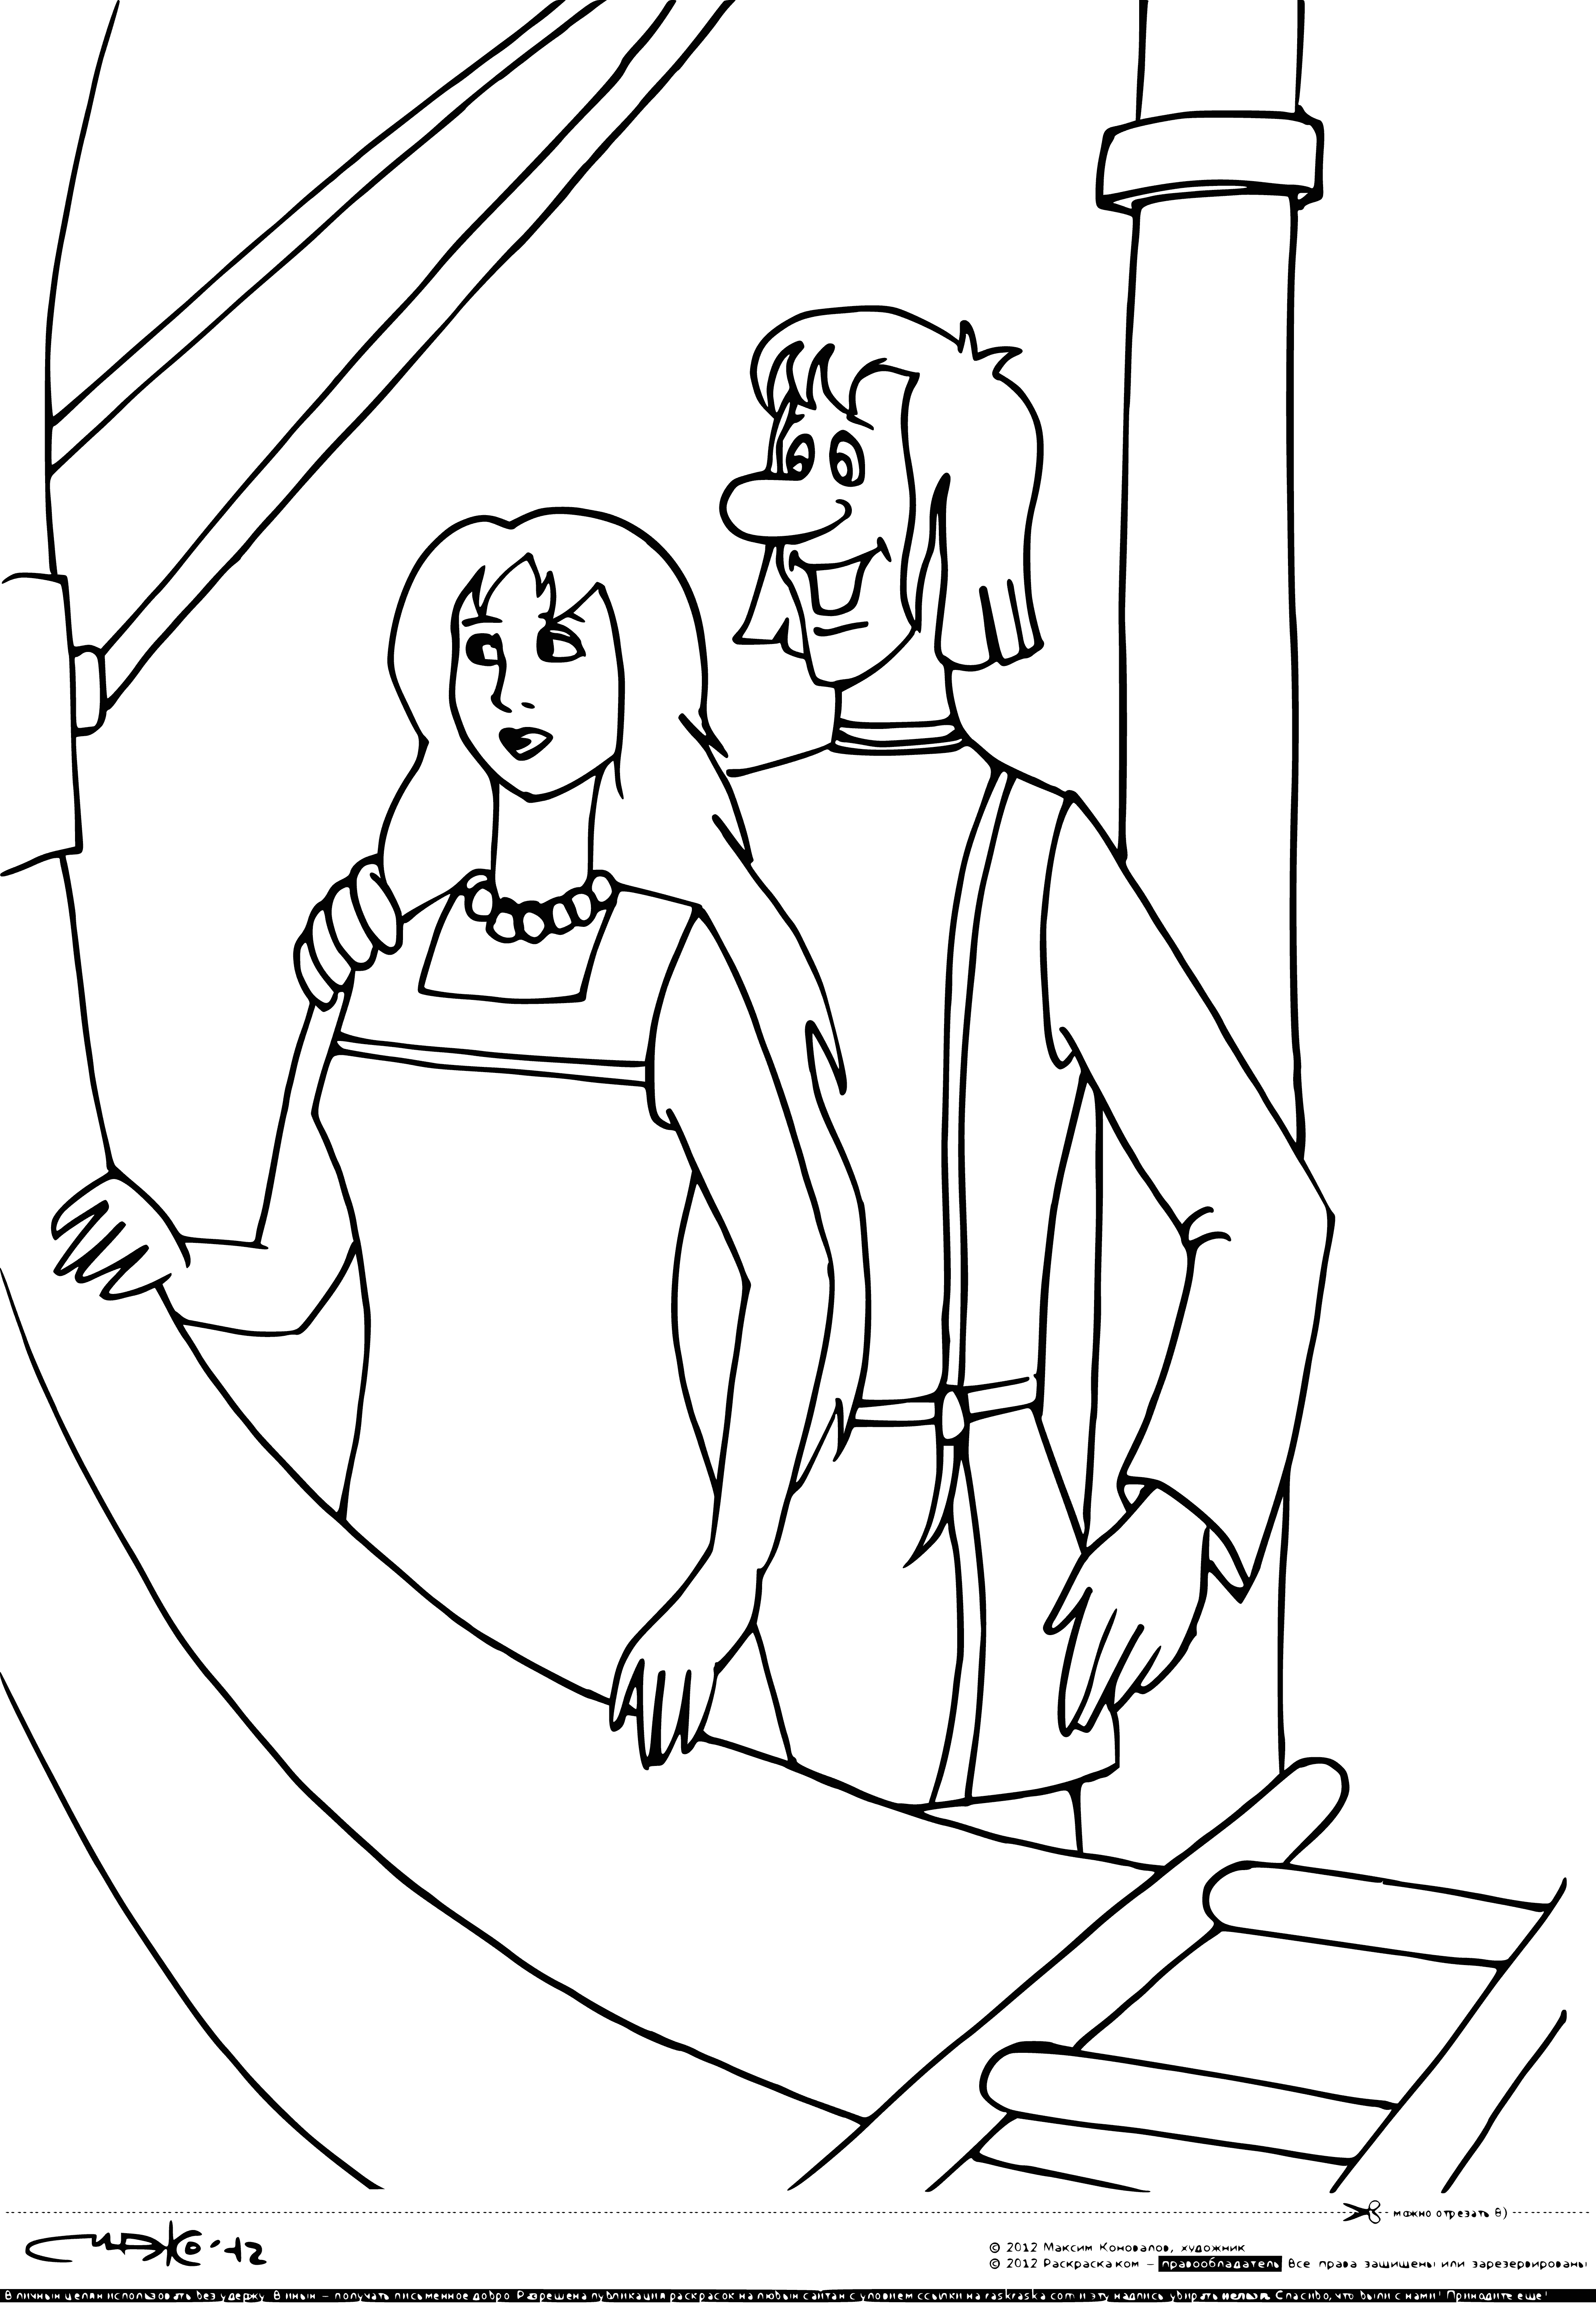 coloring page: Two people on a large ship with two levels, windows, and two propellers, flying over water with life jackets.